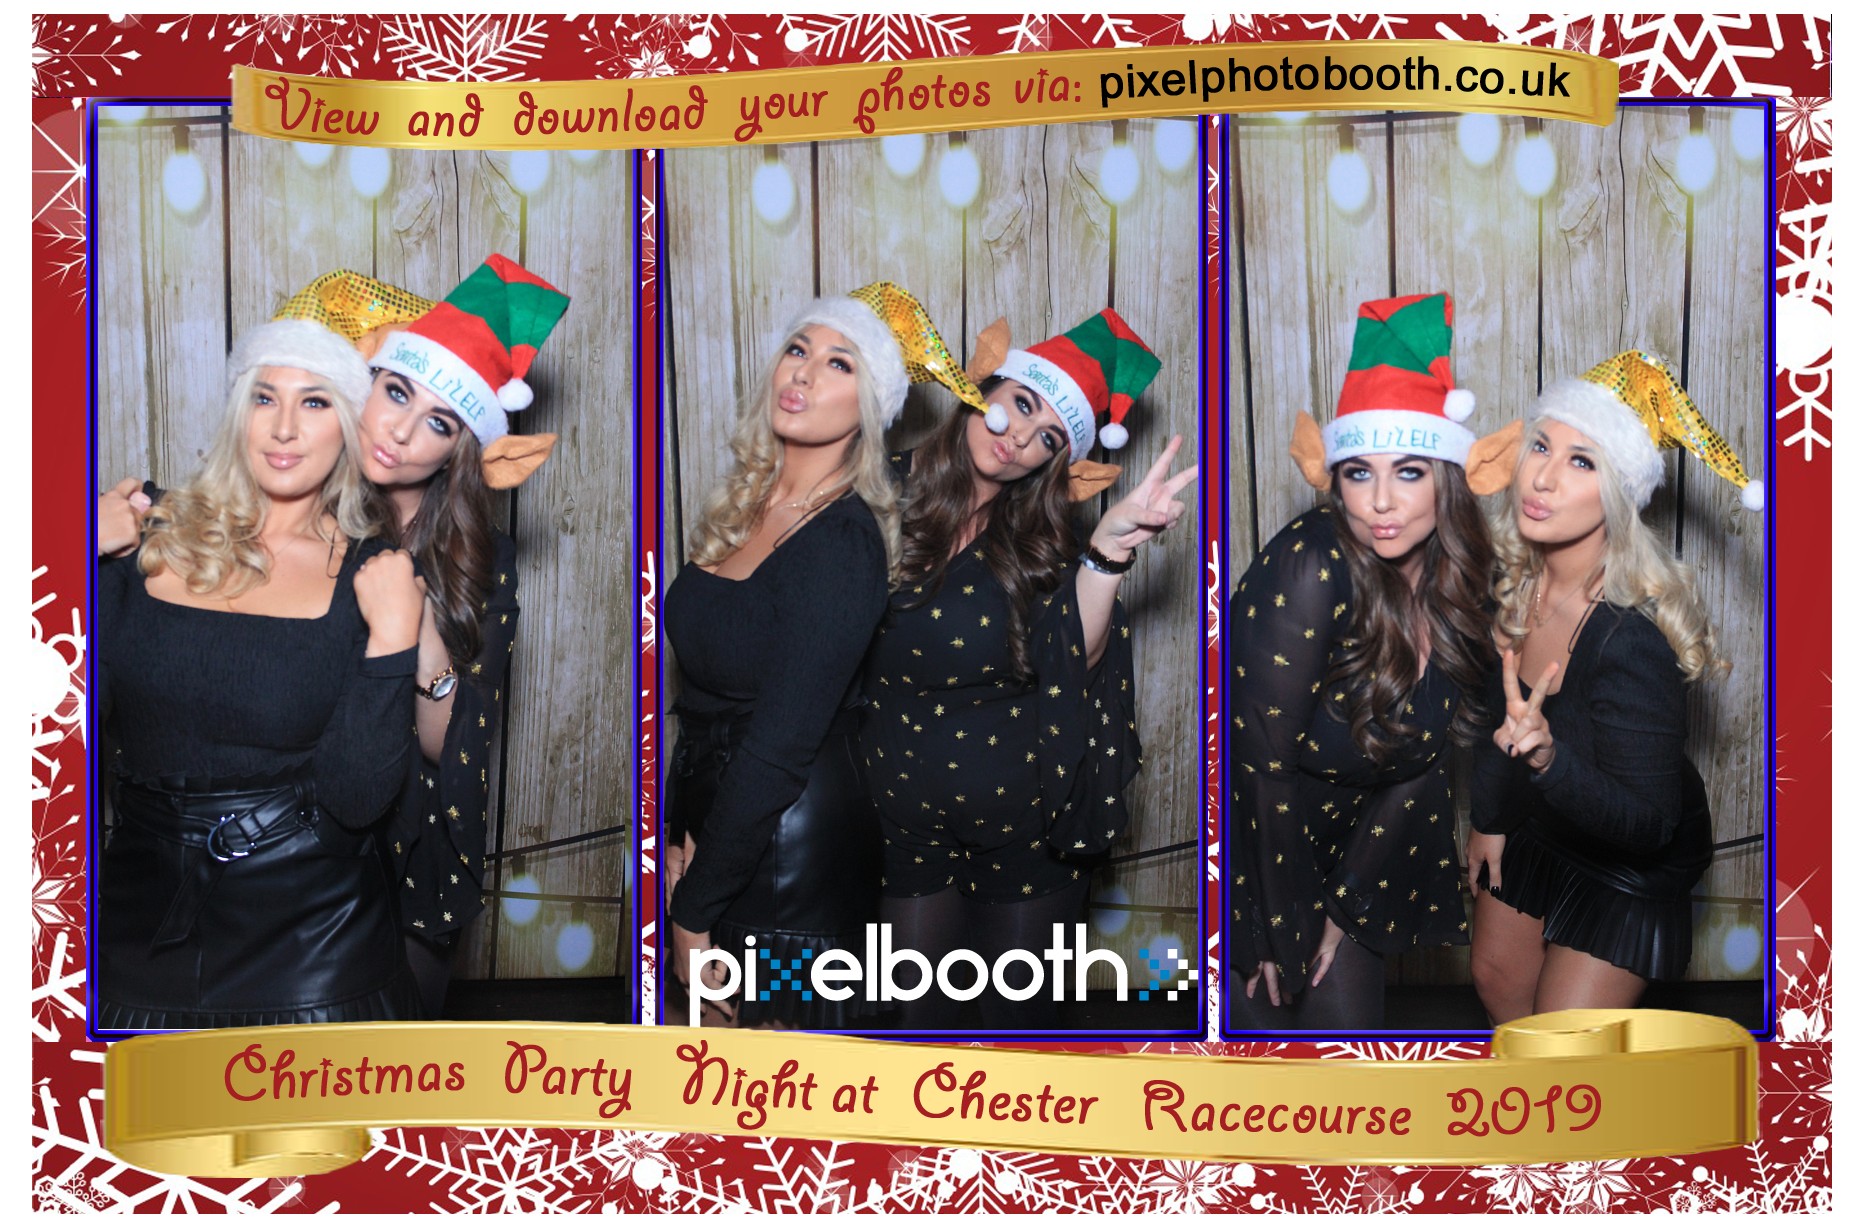 14th Dec 2019: Chester Racecourse Christmas Party Night